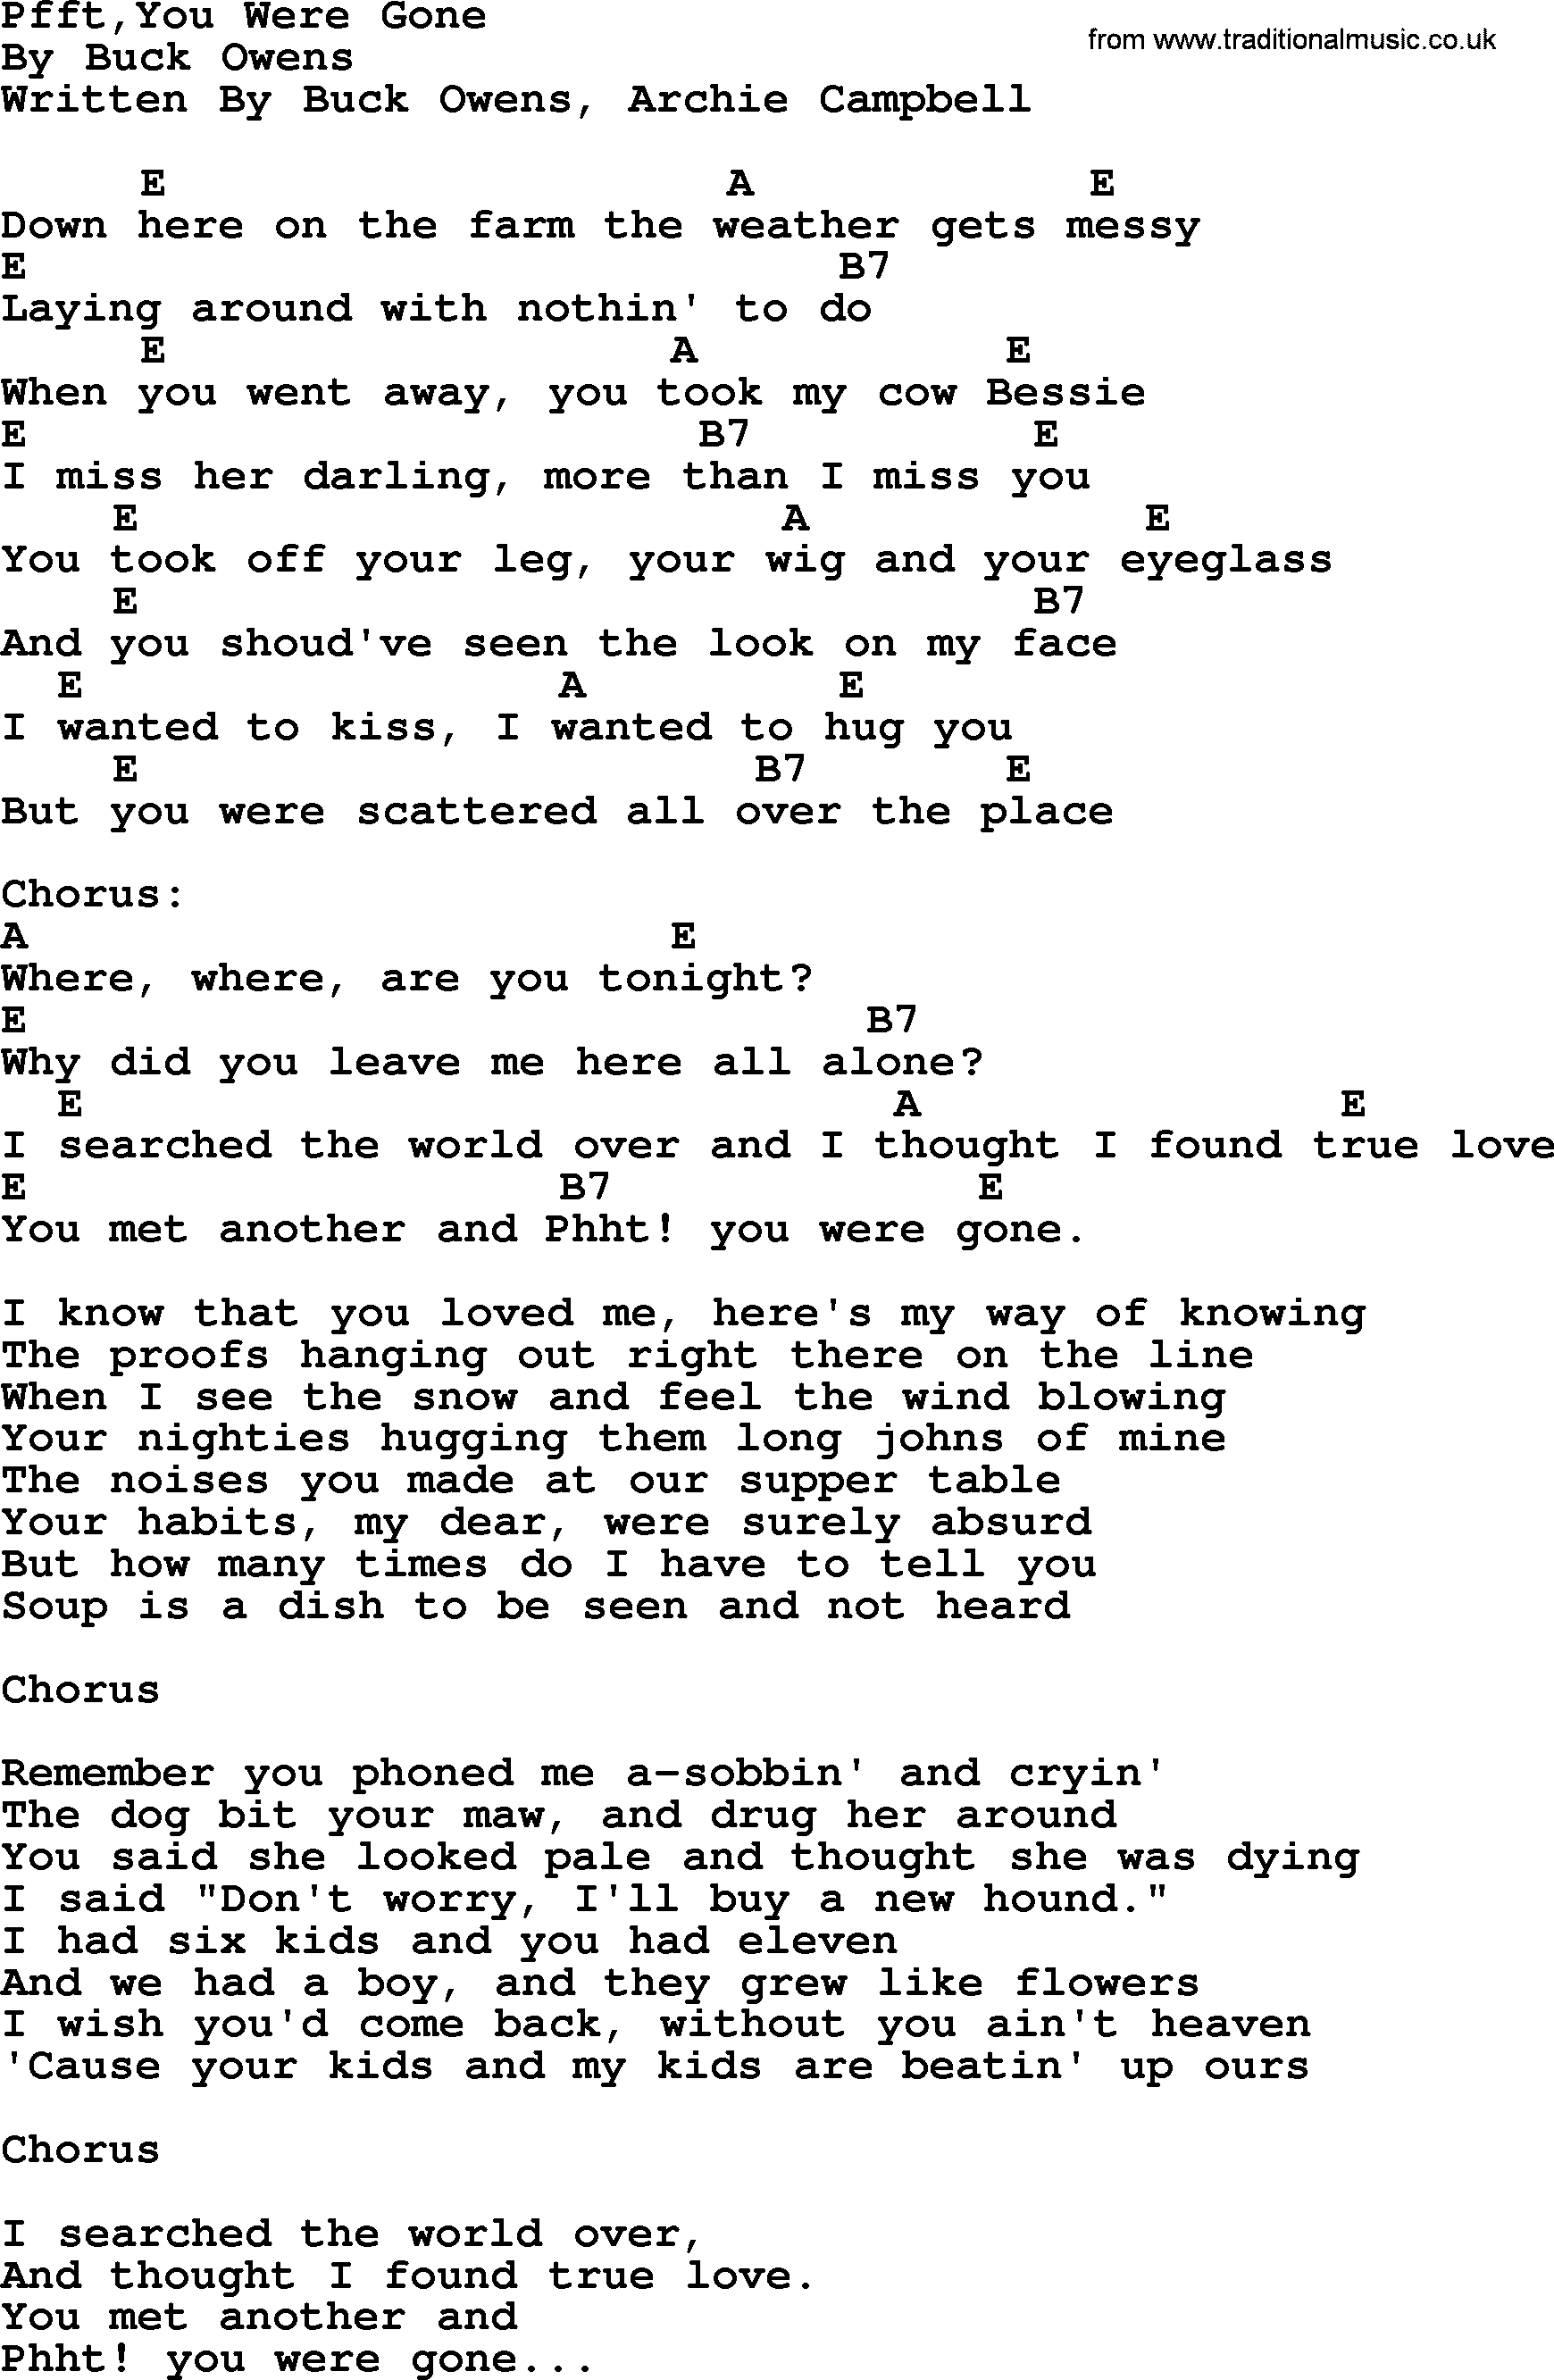 Pfft You Were Gone Bluegrass Lyrics With Chords